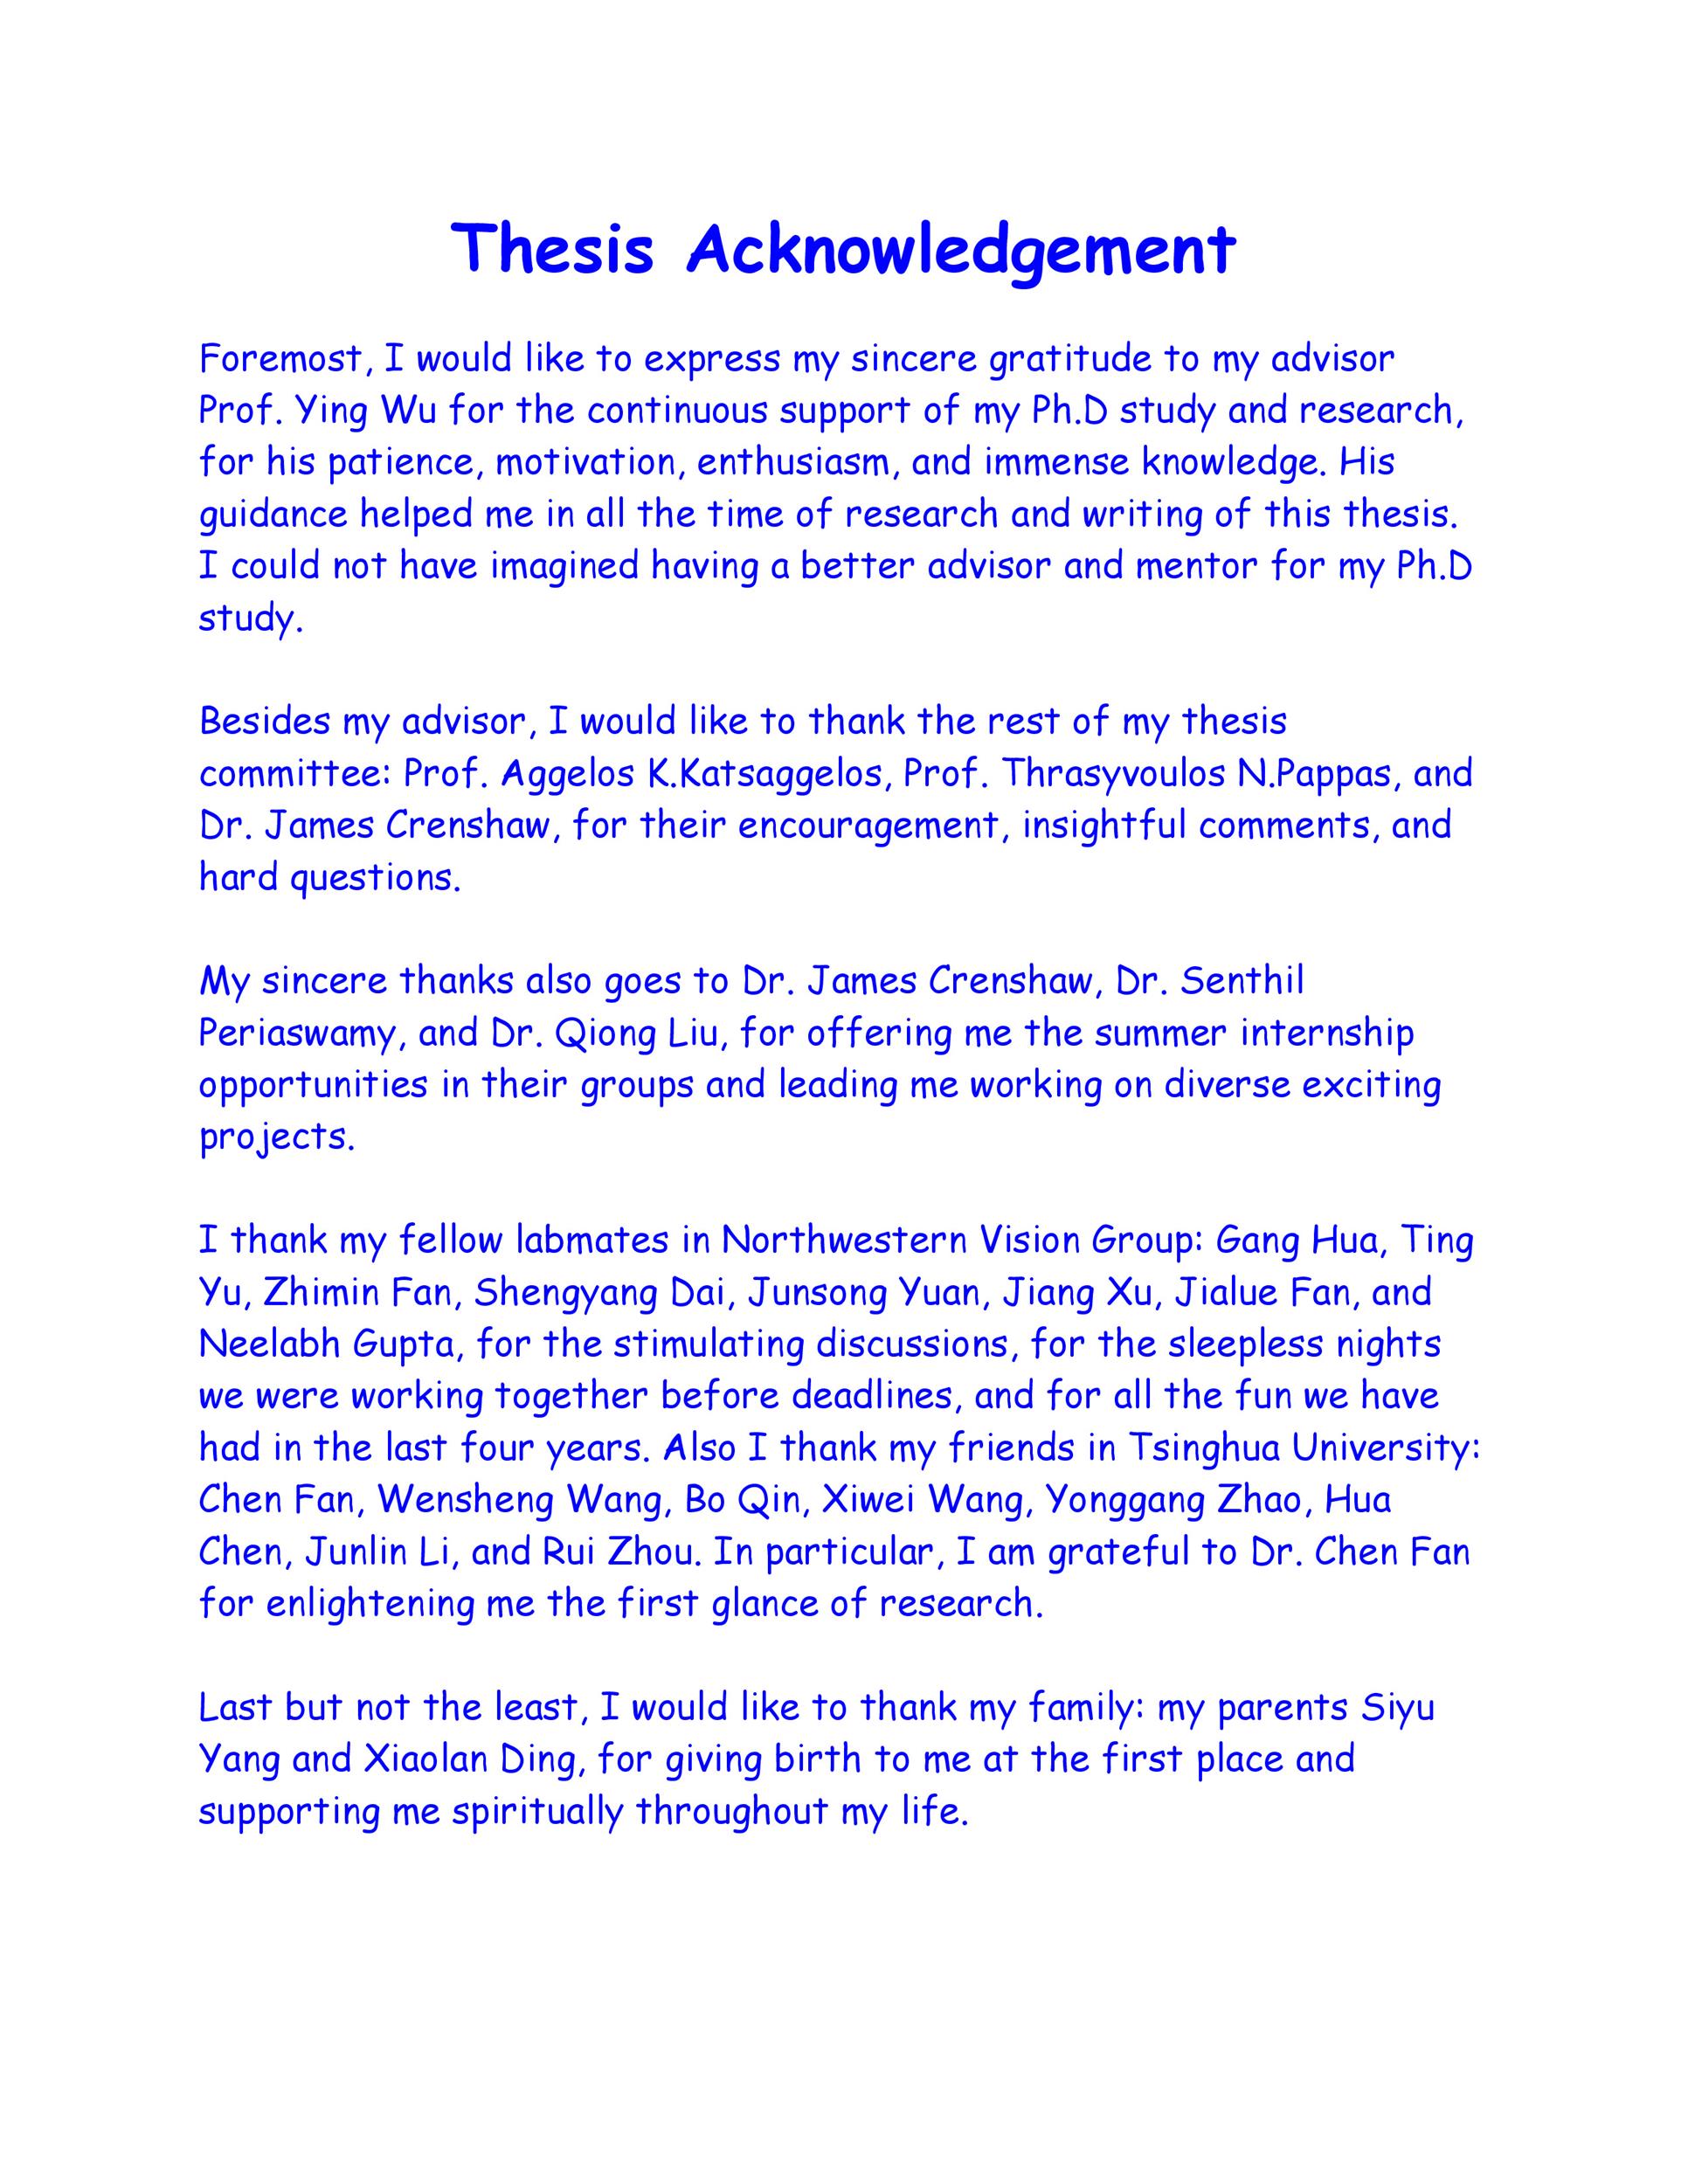 Dissertation Acknowledgements | Who To Thank and How To Write